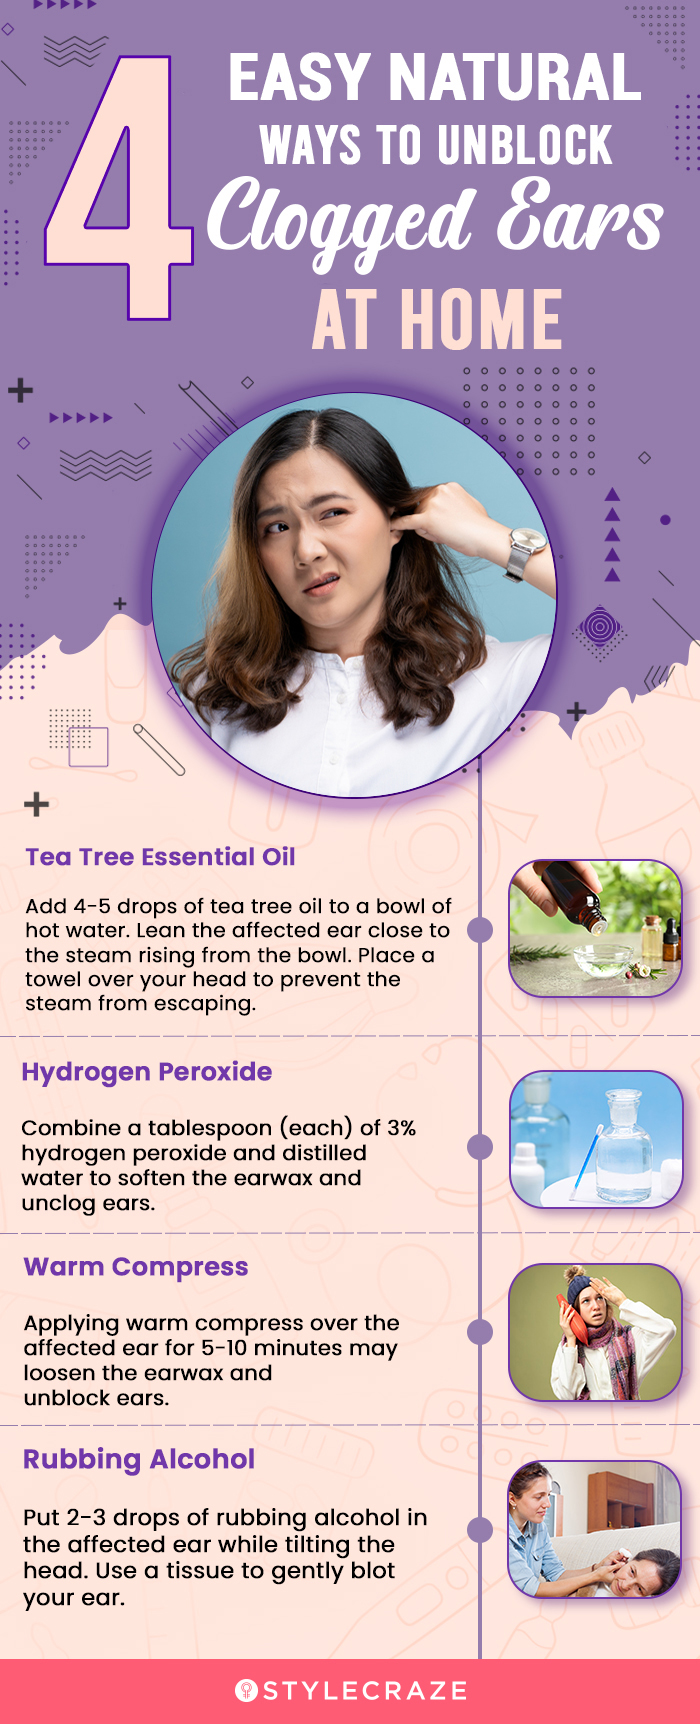 4 easy natural ways to unblock clogged ears at home (infographic)